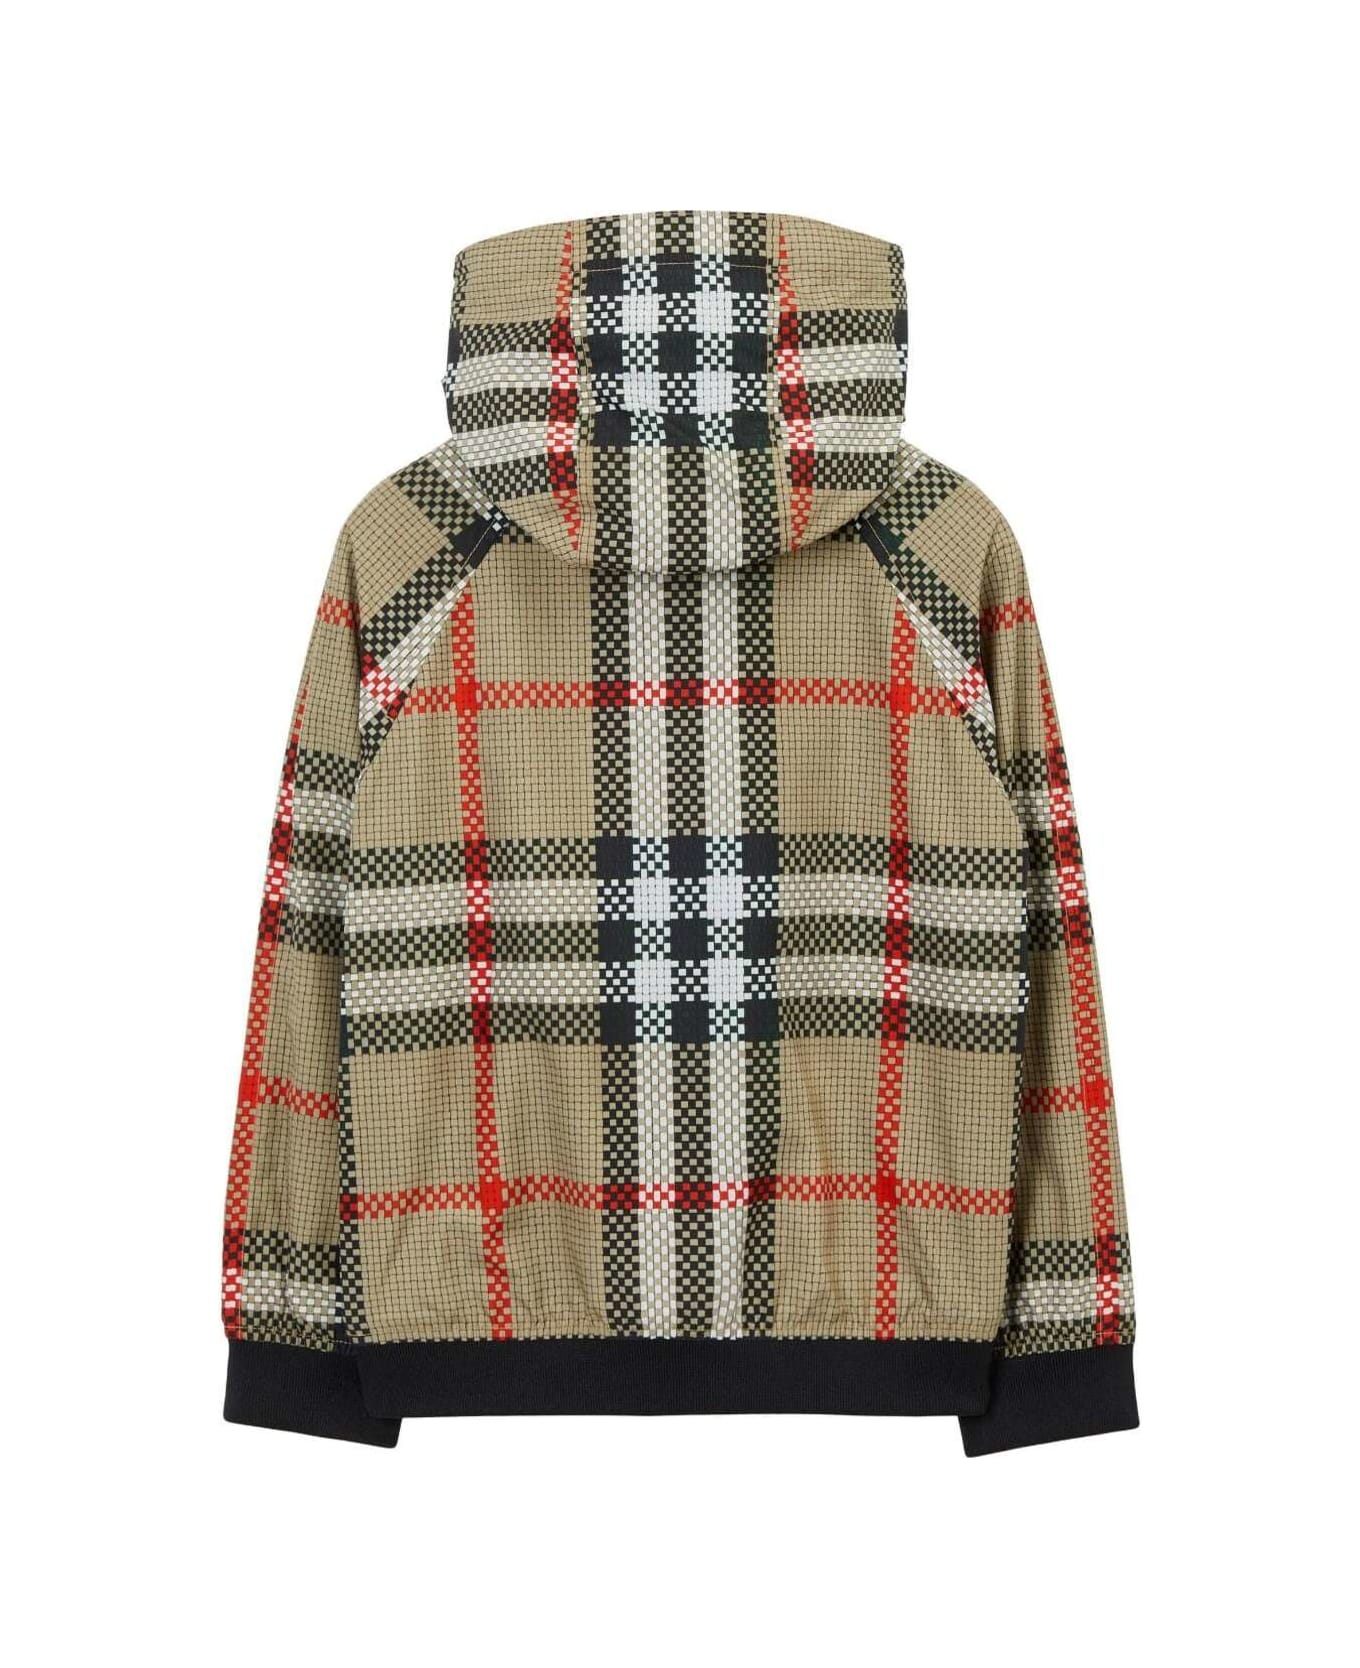 Burberry 'troy' Beige Hooded Jacket With Vintage Check Print In Nylon Boy - BEIGE